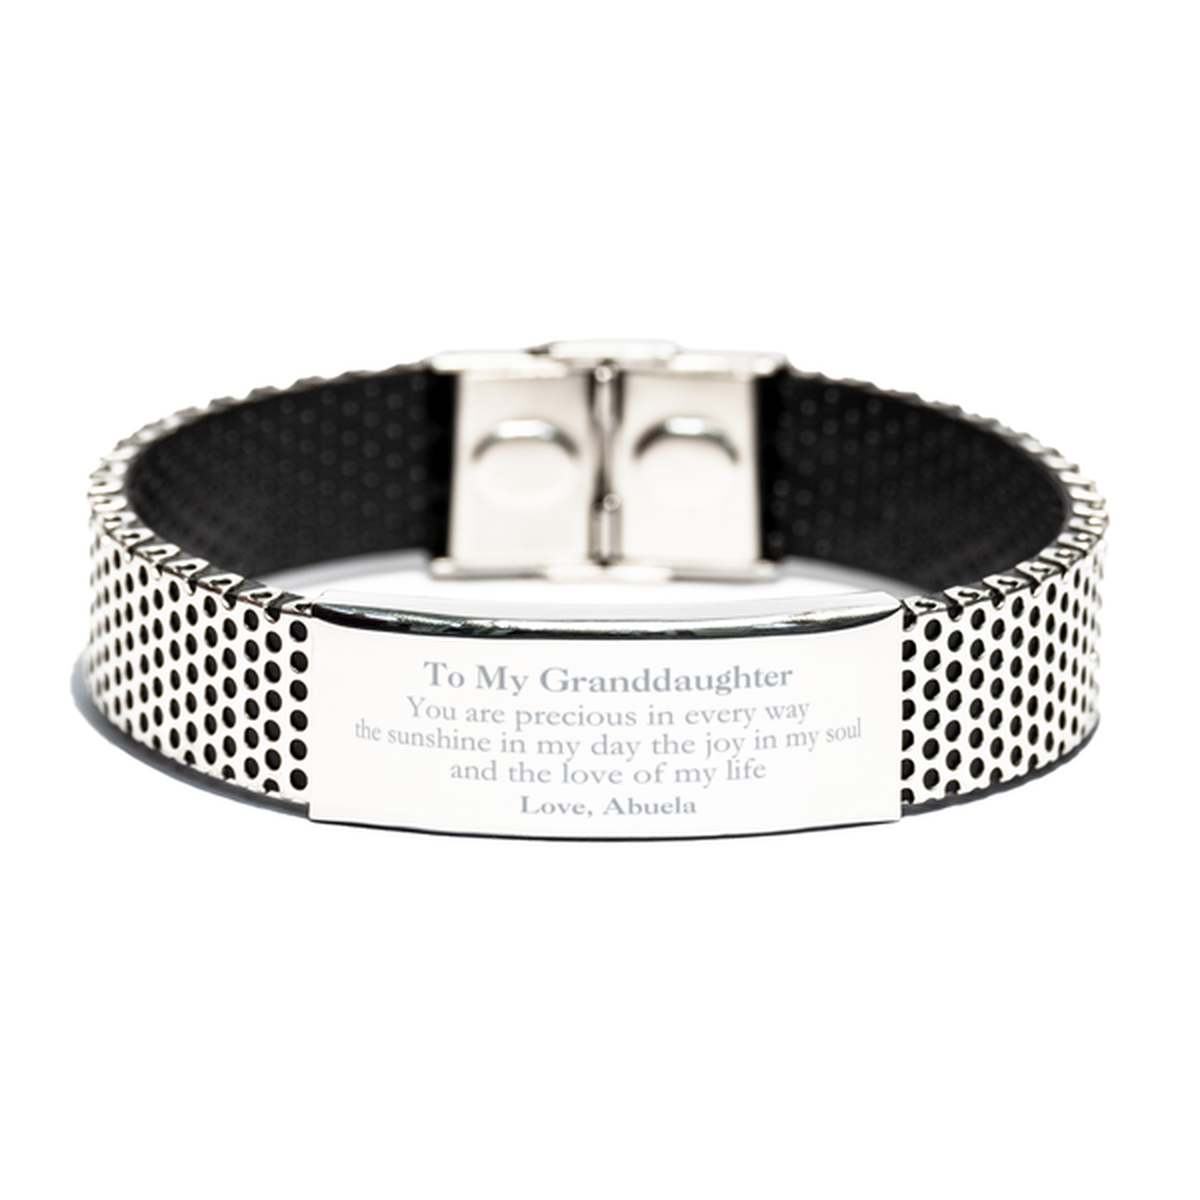 Graduation Gifts for Granddaughter Stainless Steel Bracelet Present from Abuela, Christmas Granddaughter Birthday Gifts Granddaughter You are precious in every way the sunshine in my day. Love, Abuela